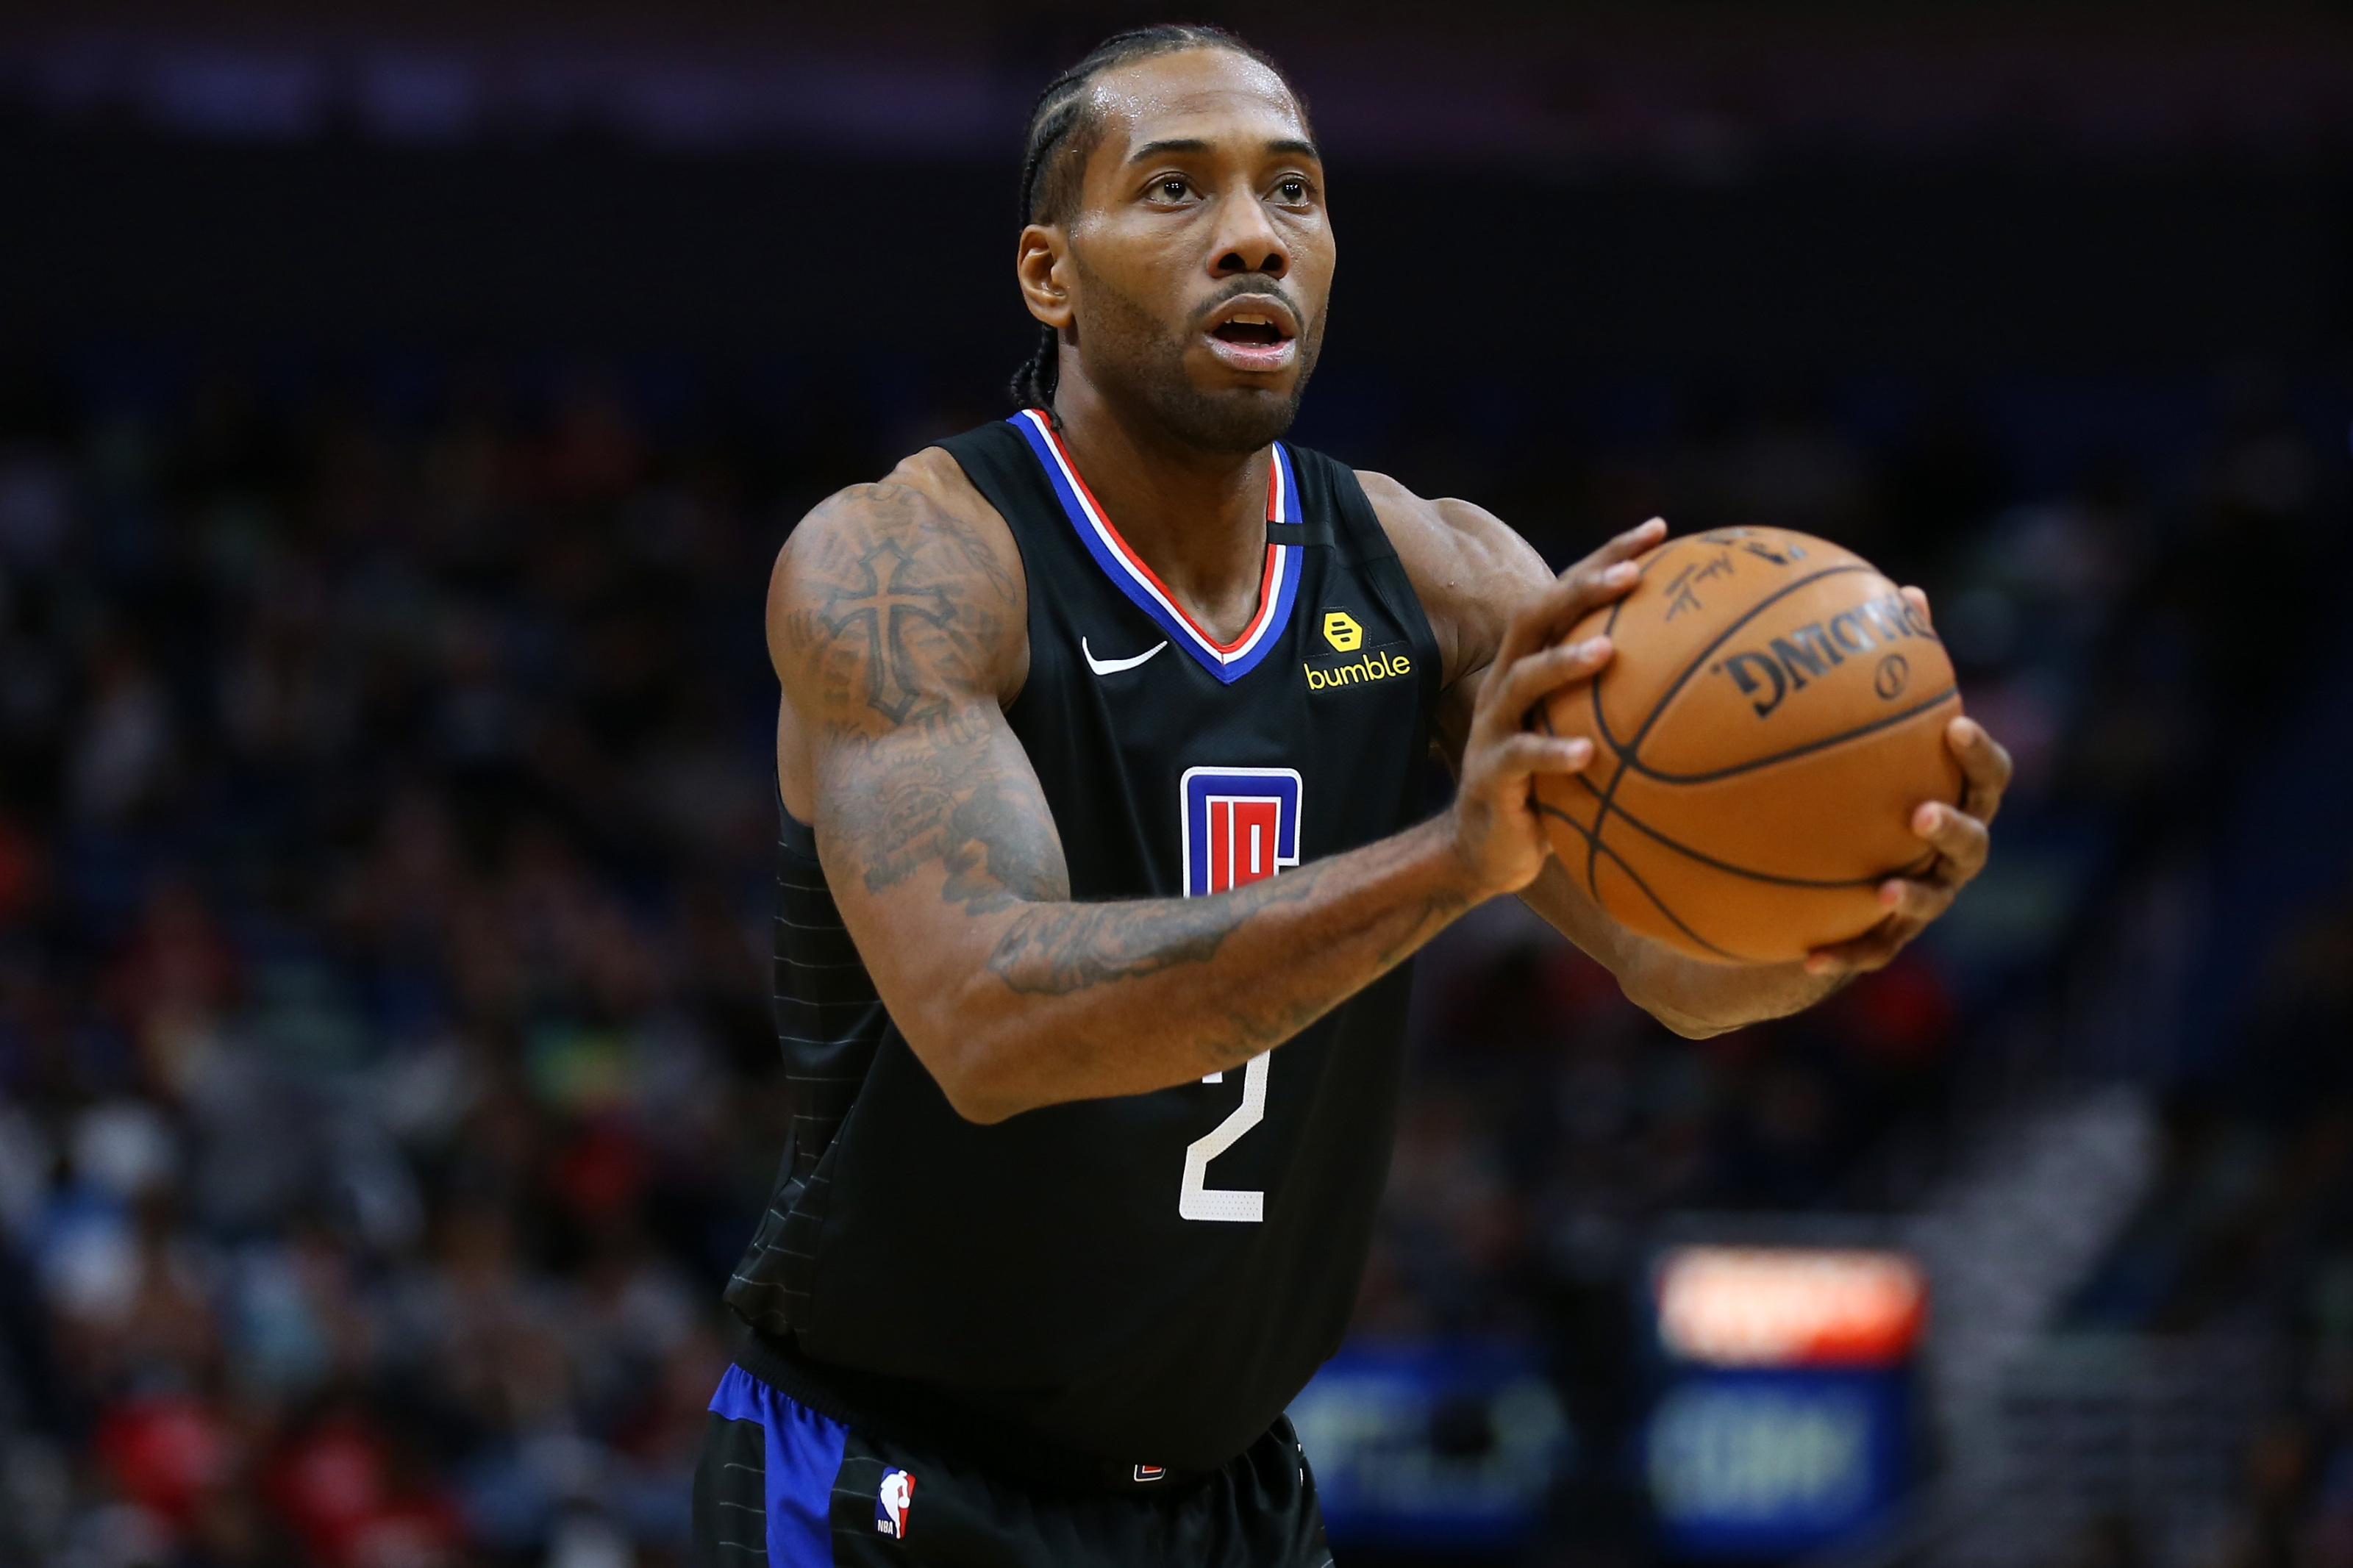 LA Clippers: Why is Kawhi Leonard overlooked as the NBA's top player?